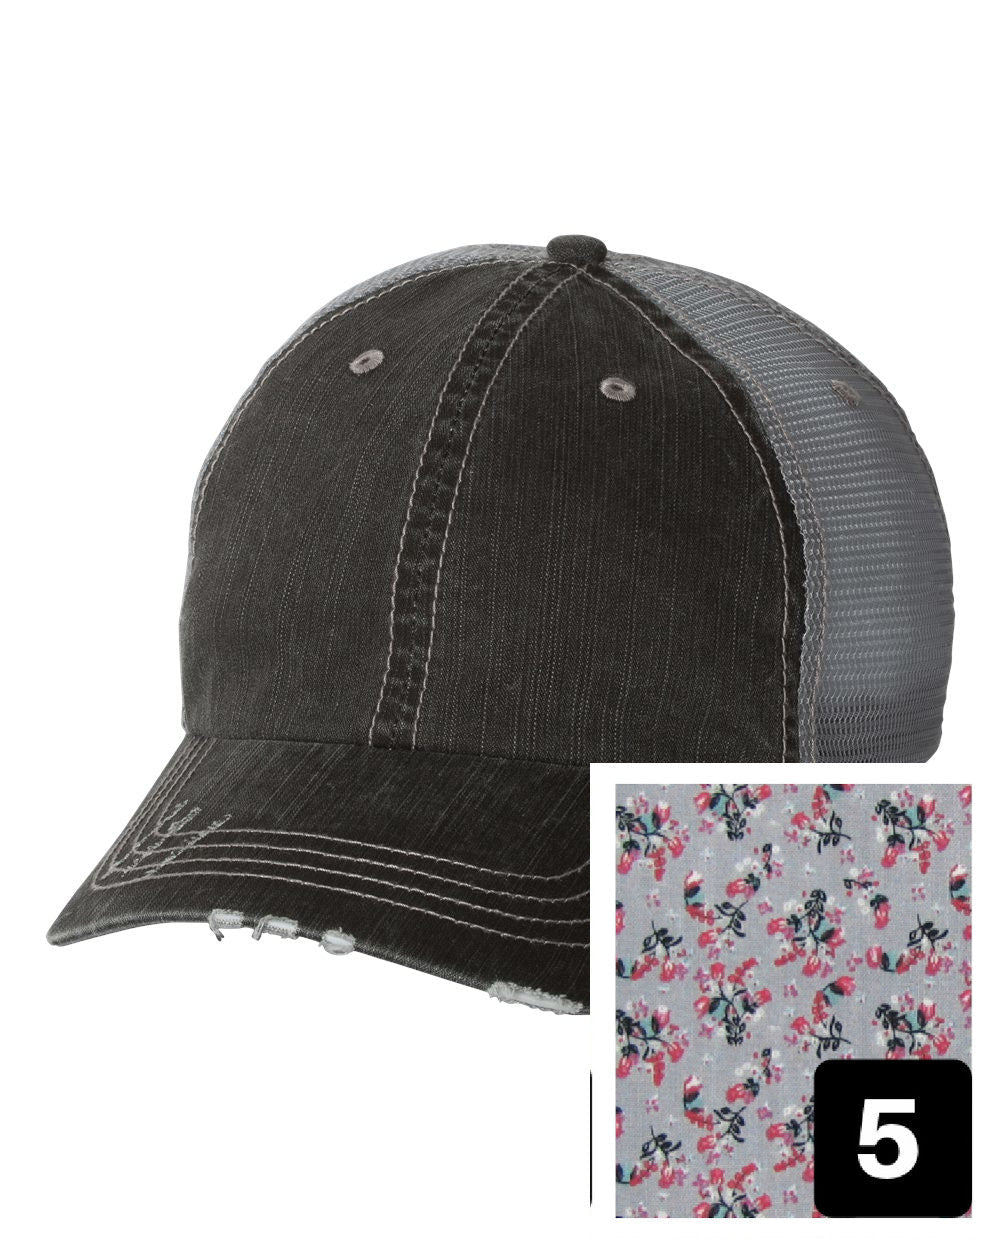 gray distressed trucker hat with purple and pink floral fabric state of New York